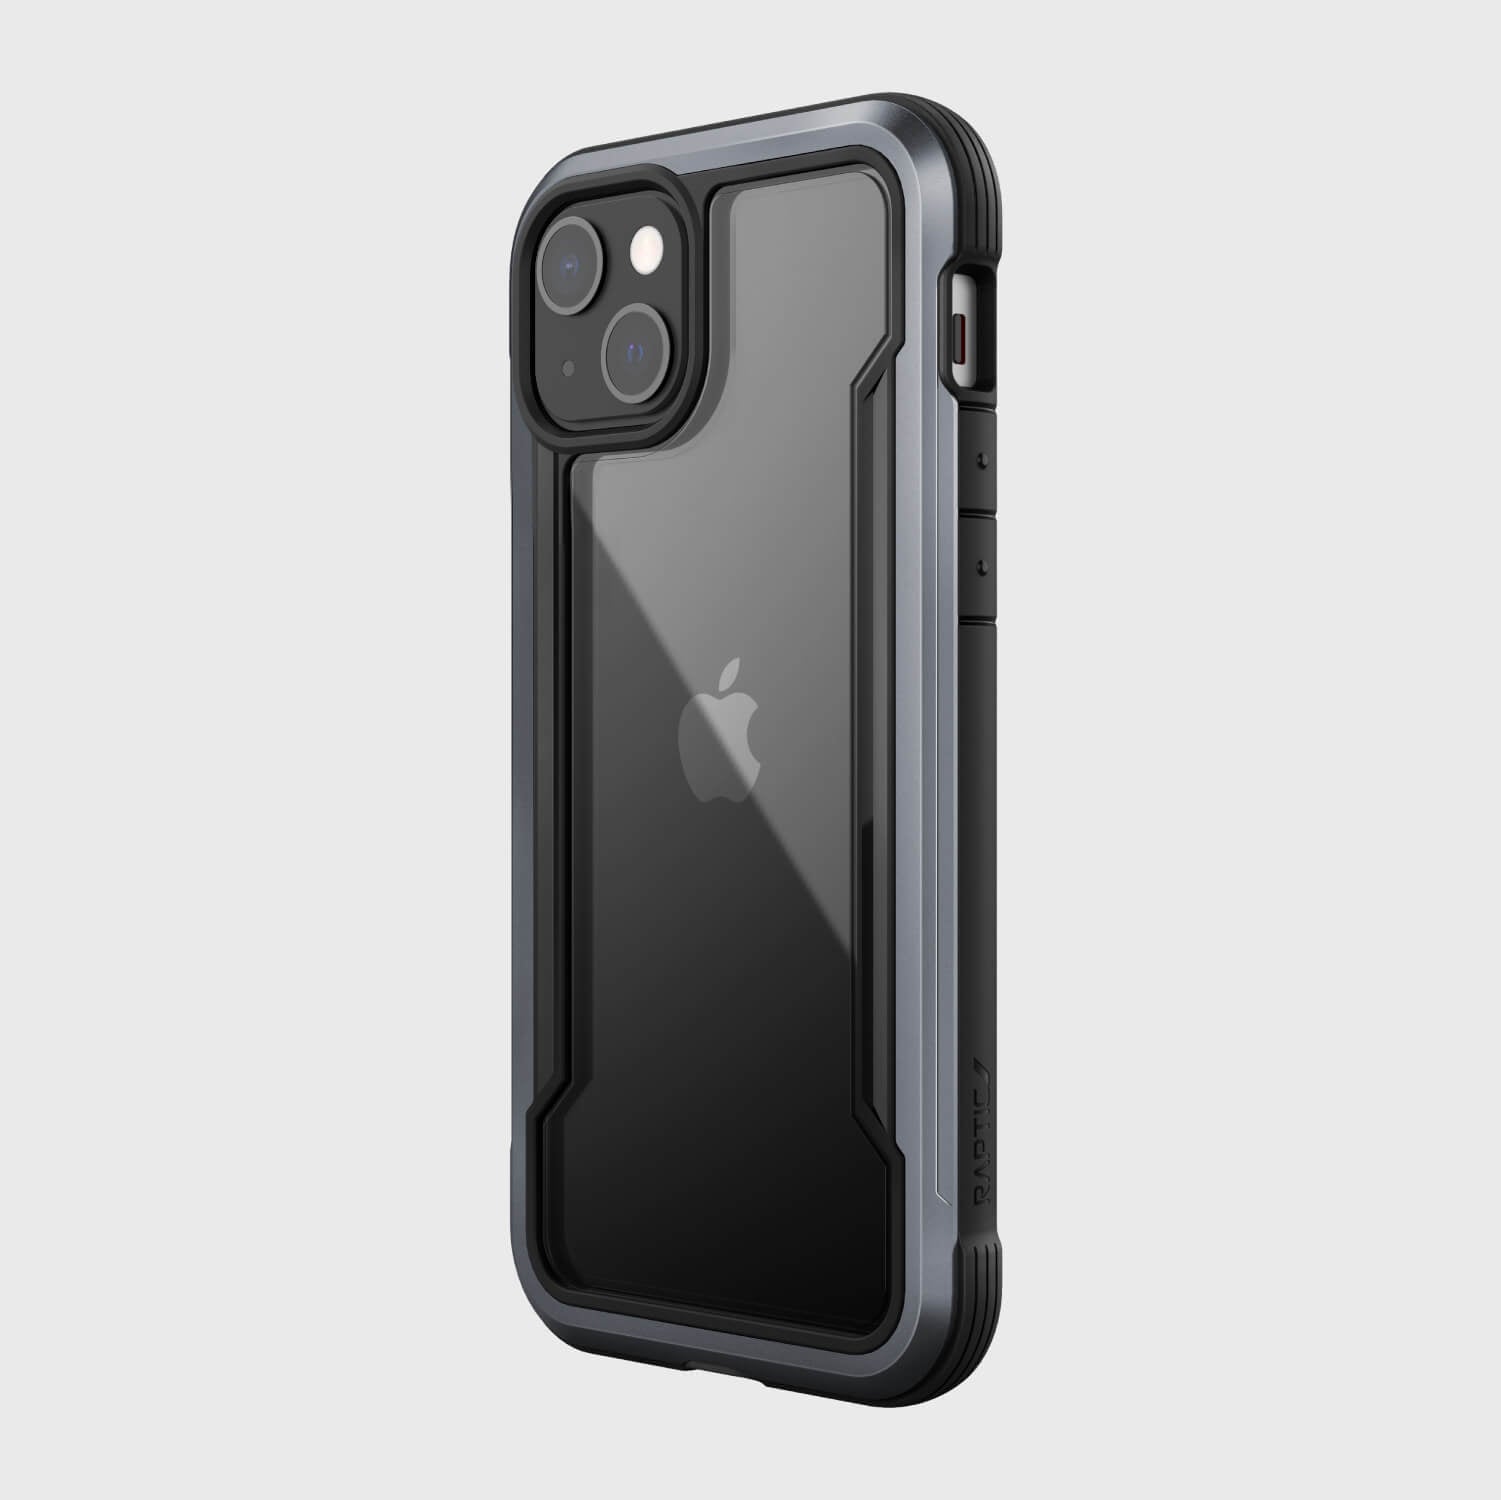 The back of the iPhone 13 Mini Case - SHIELD PRO by Raptic is shown.